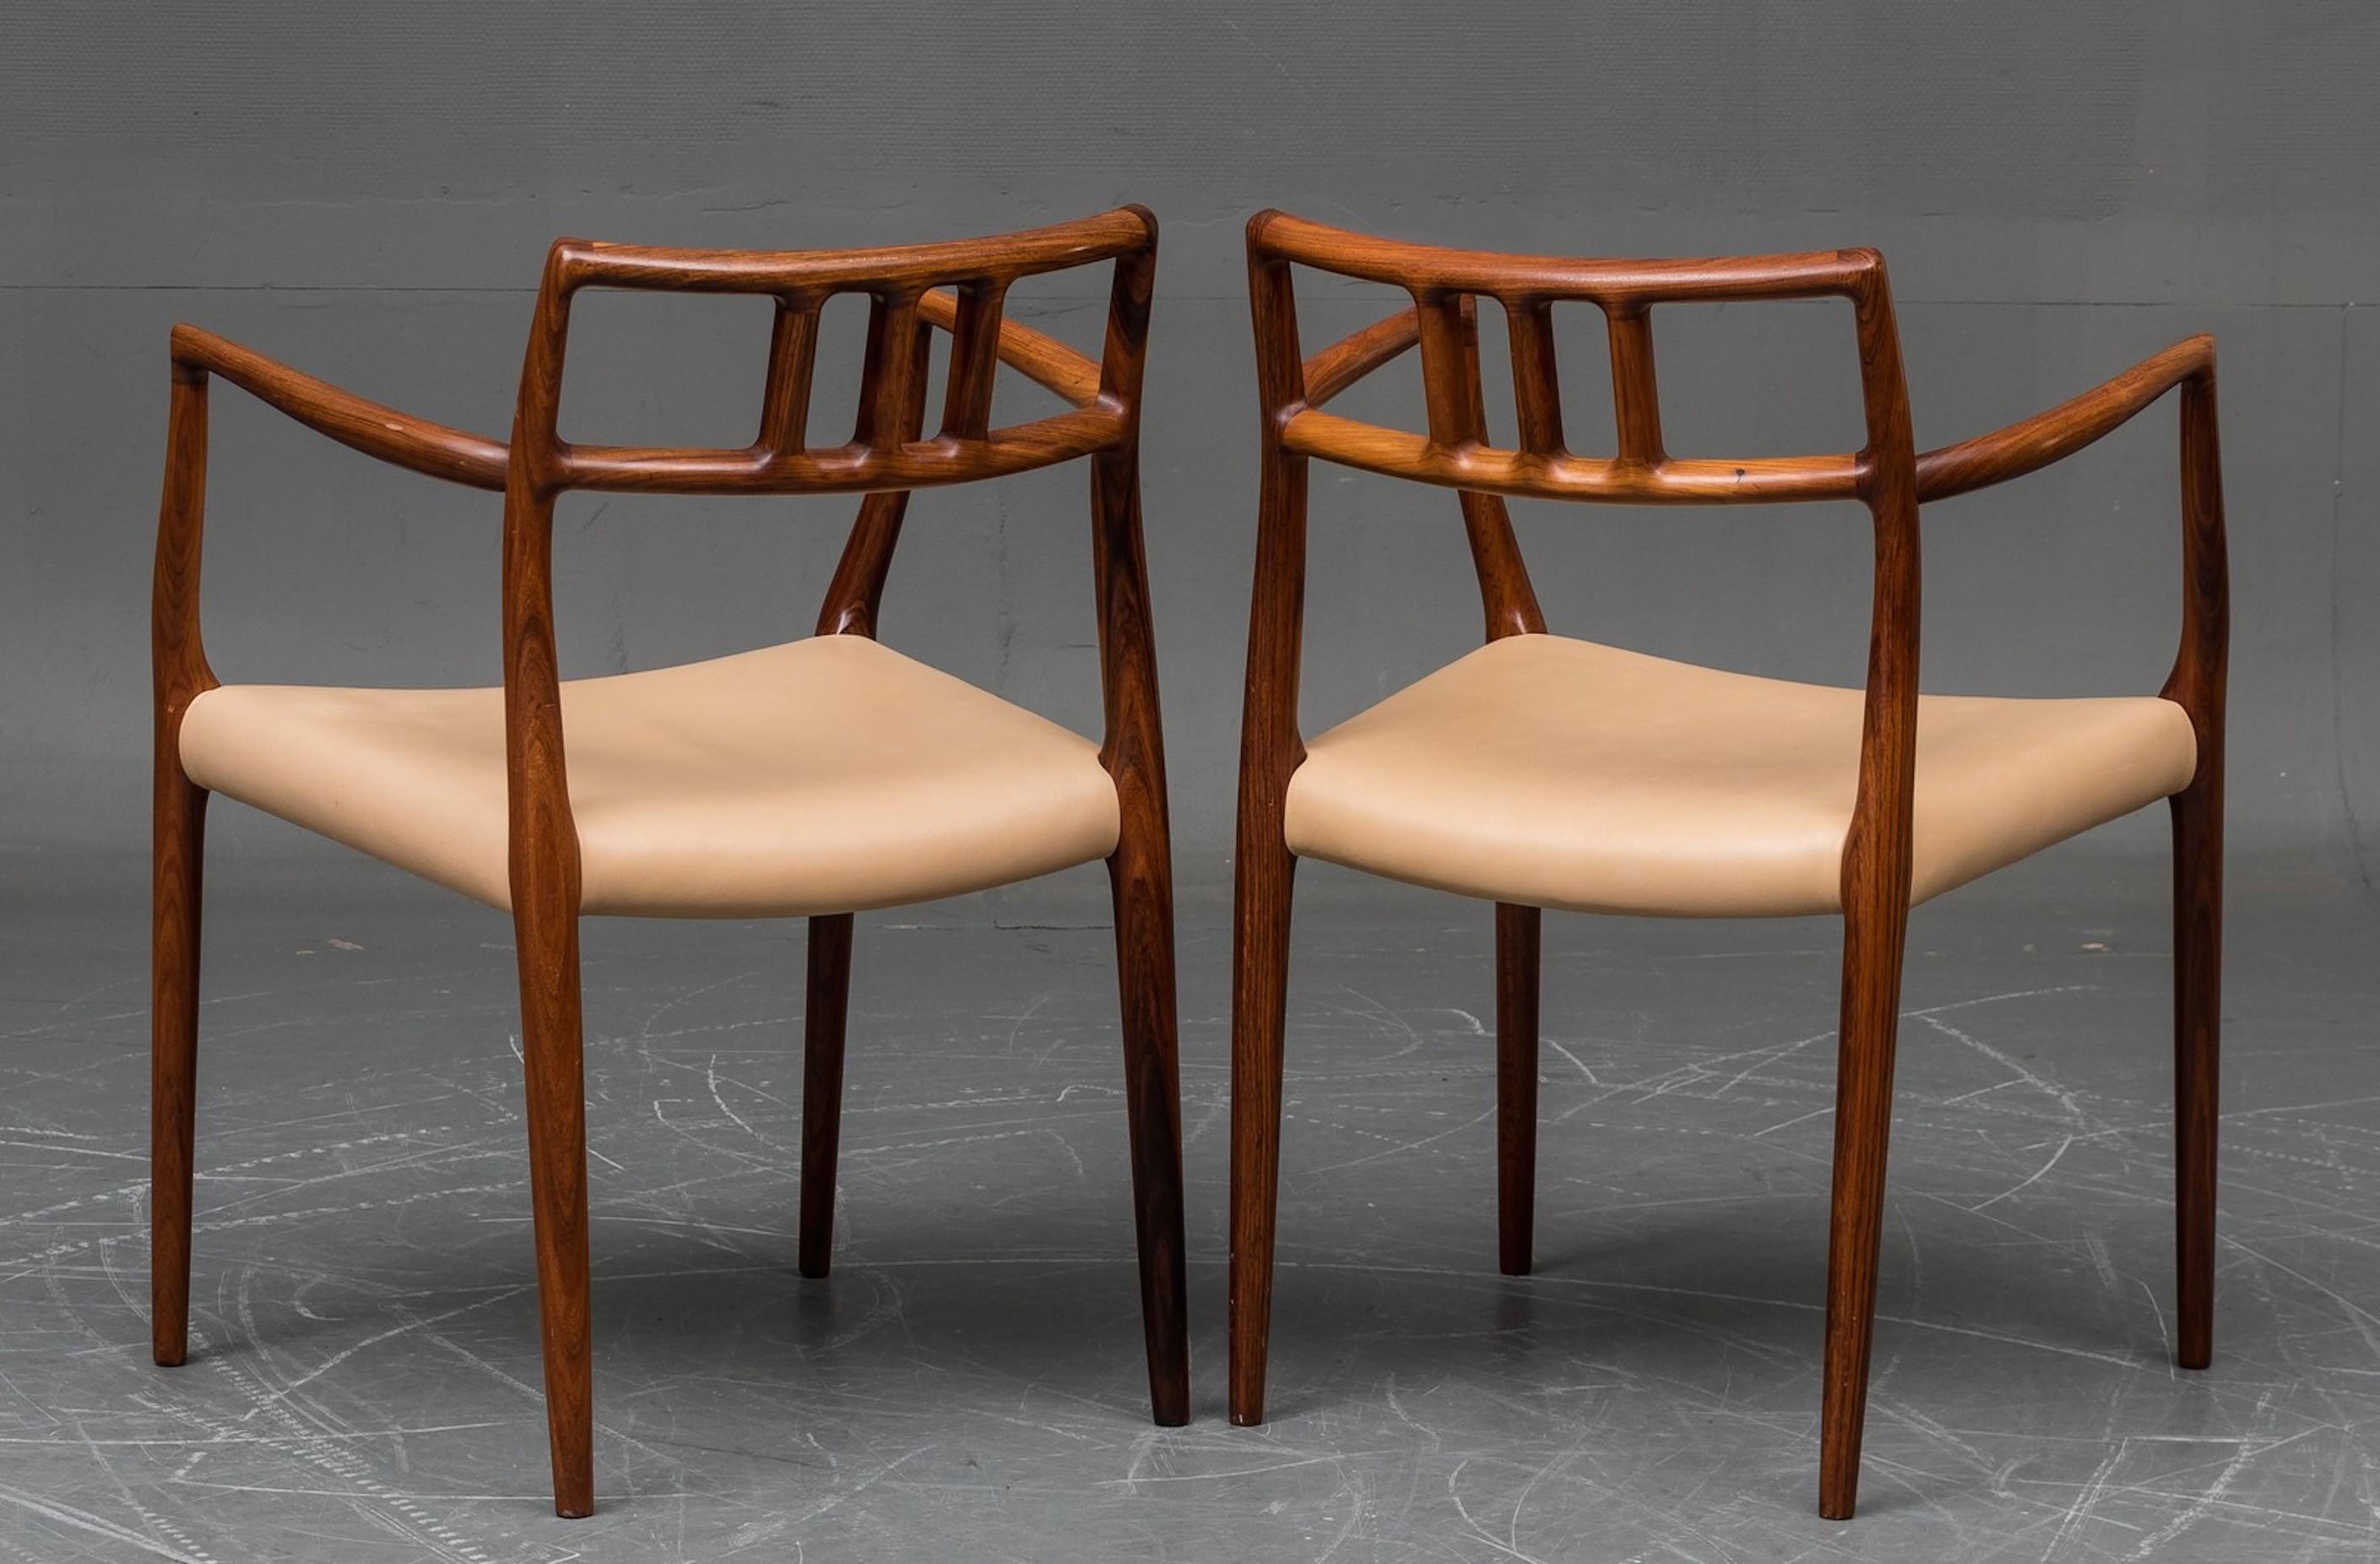 A pair of rosewood lounge chairs designed by N.O. Moller and edited by JL Mobelfabrick in 1960s. Solid rosewood frame and light leather upholstered. Excellent condition.